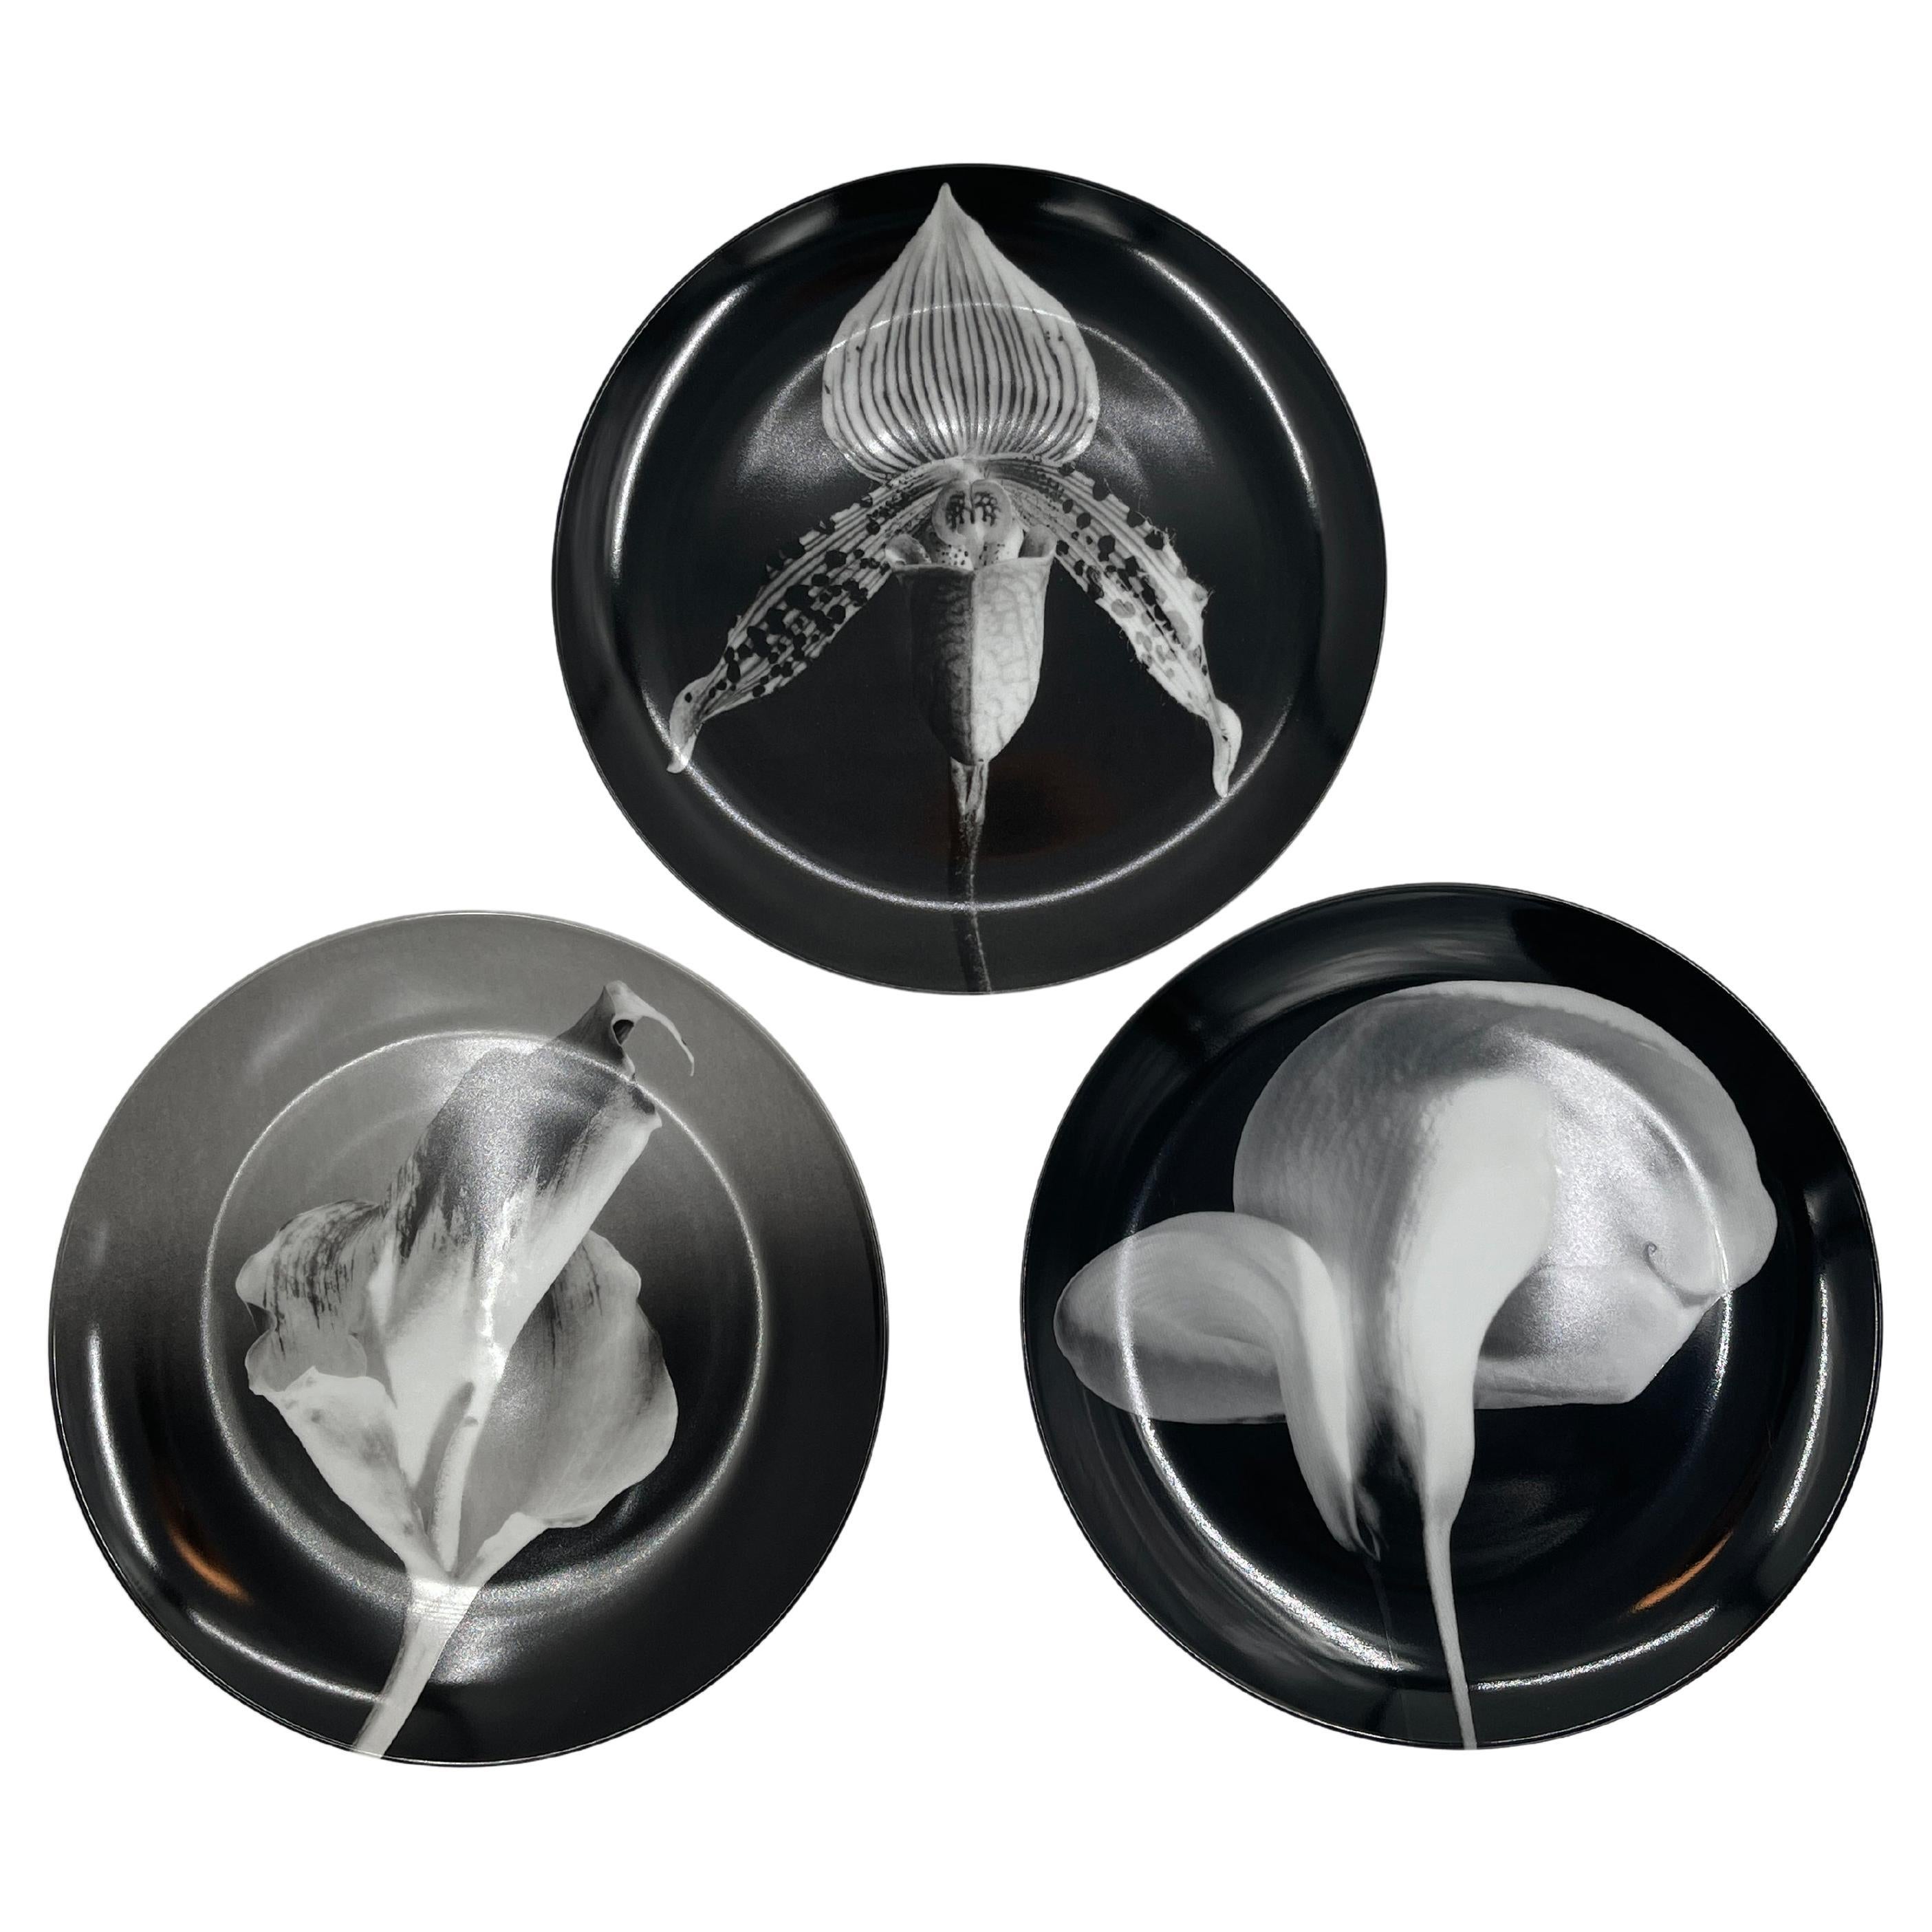 Swid Powell - Robert Mapplethorpe Porcelain Plates, Orchid - Flower - Calla Lily